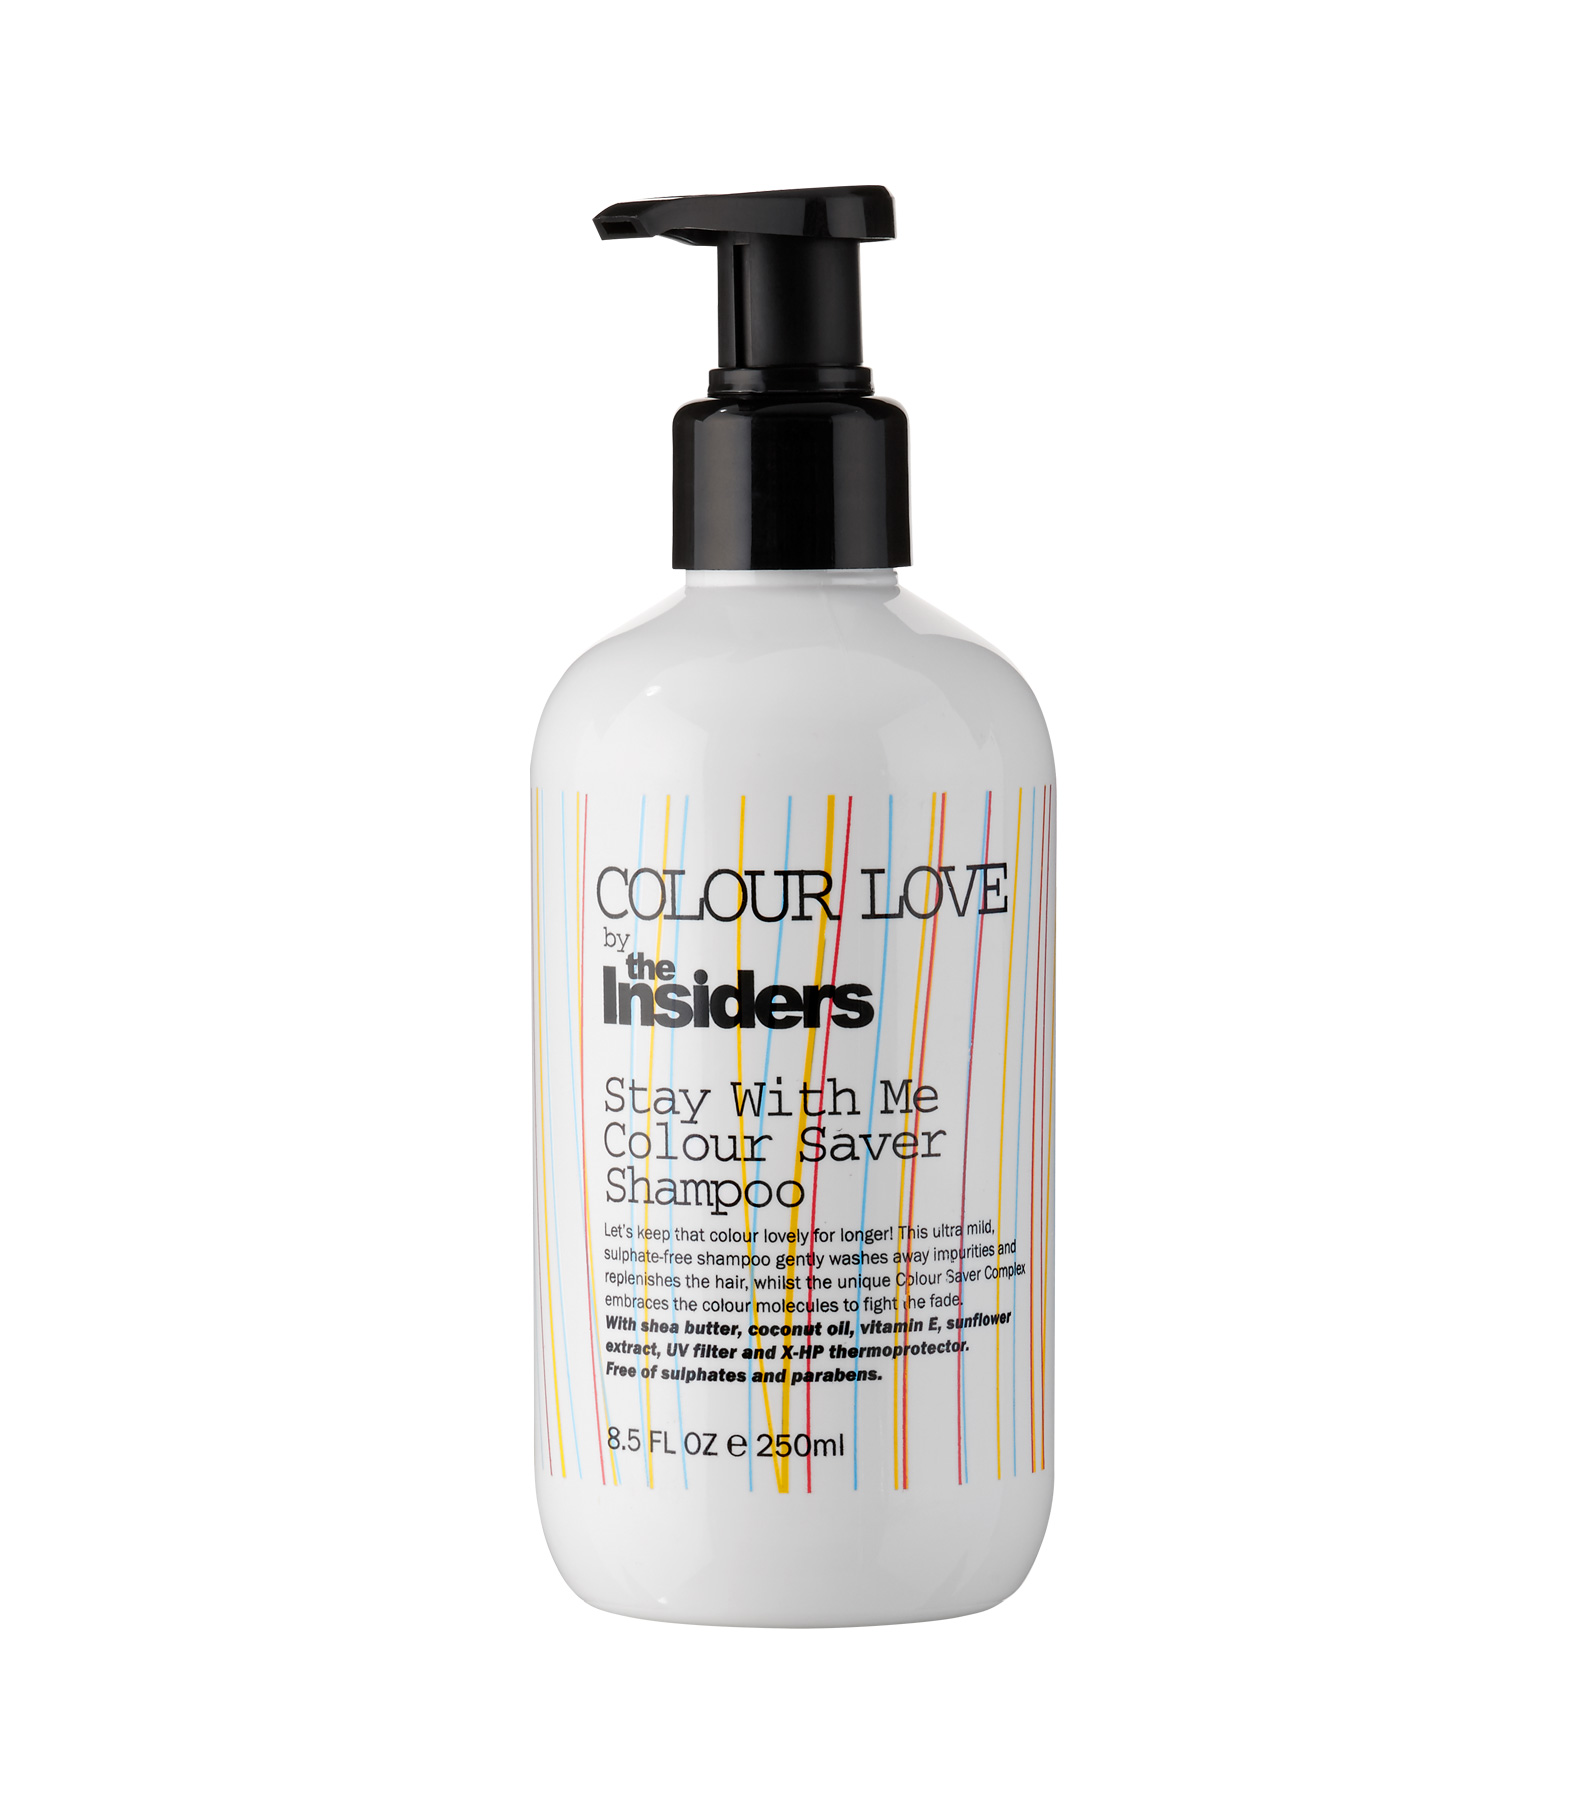 The Insiders Stay With Me Colour Saver Shampoo 250ml